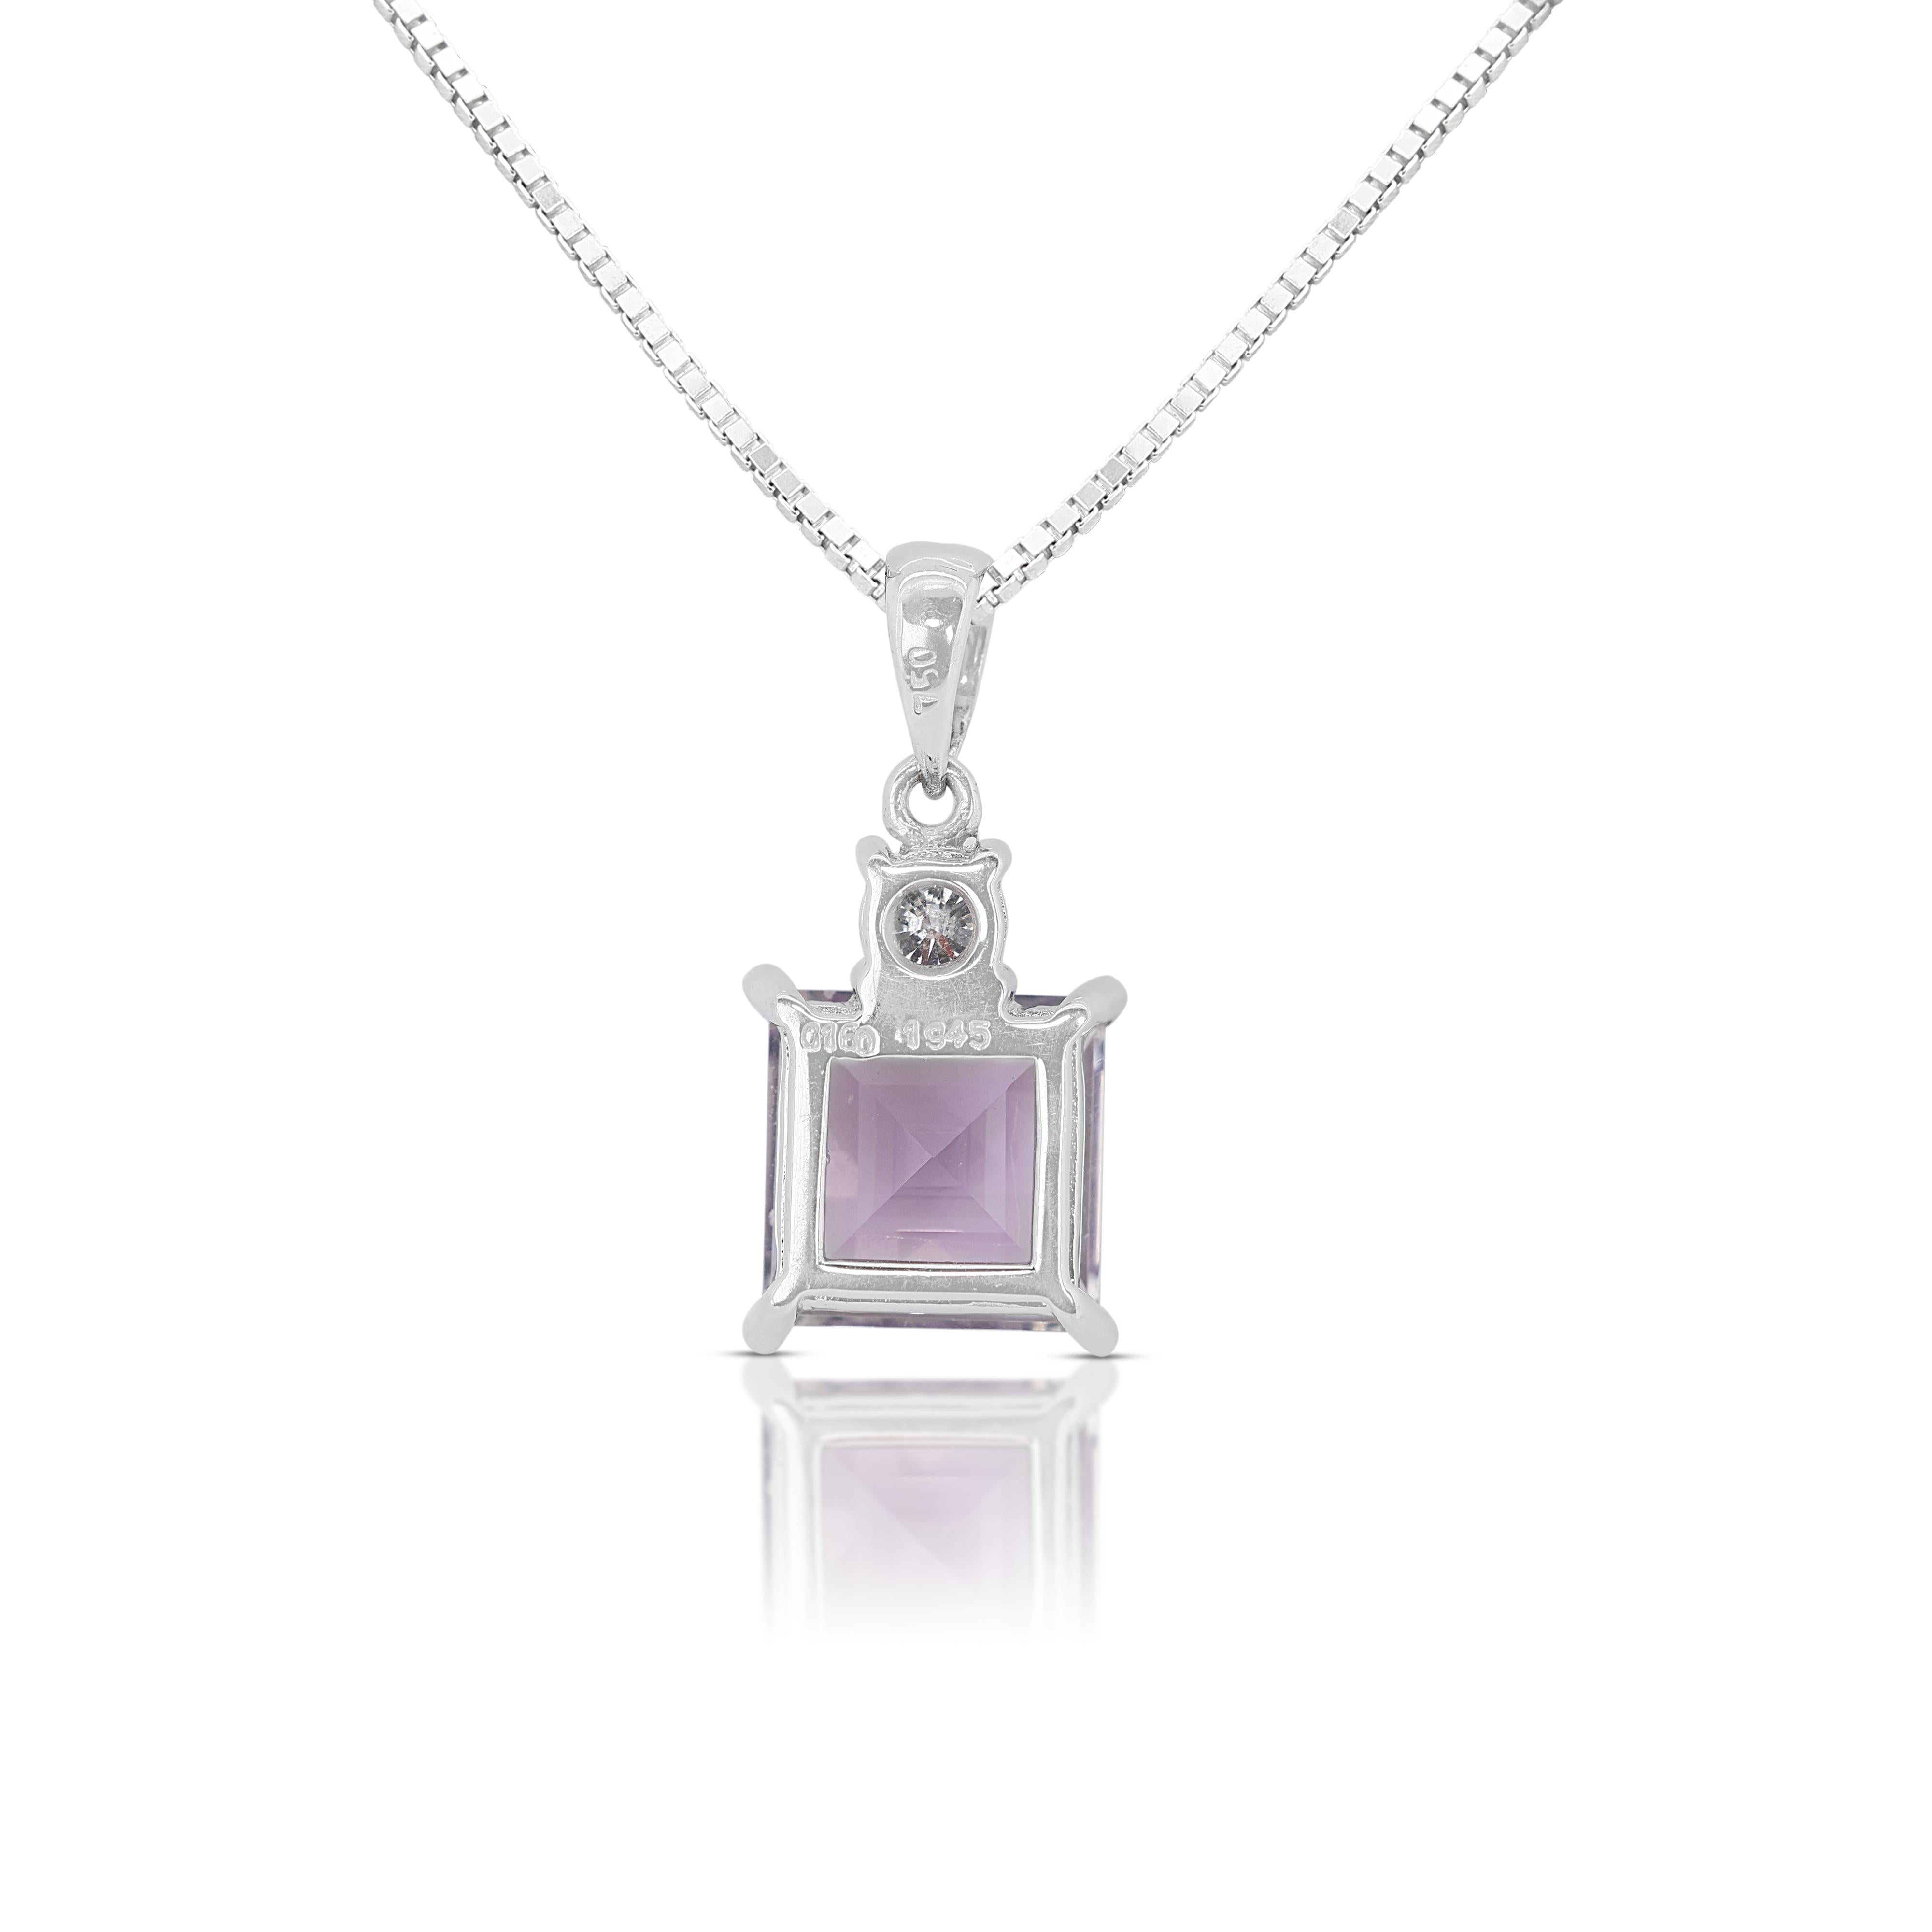 Elegant 1.94ct Amethyst Pendant w/ Diamonds in 18K White Gold-Chain Not Included For Sale 1